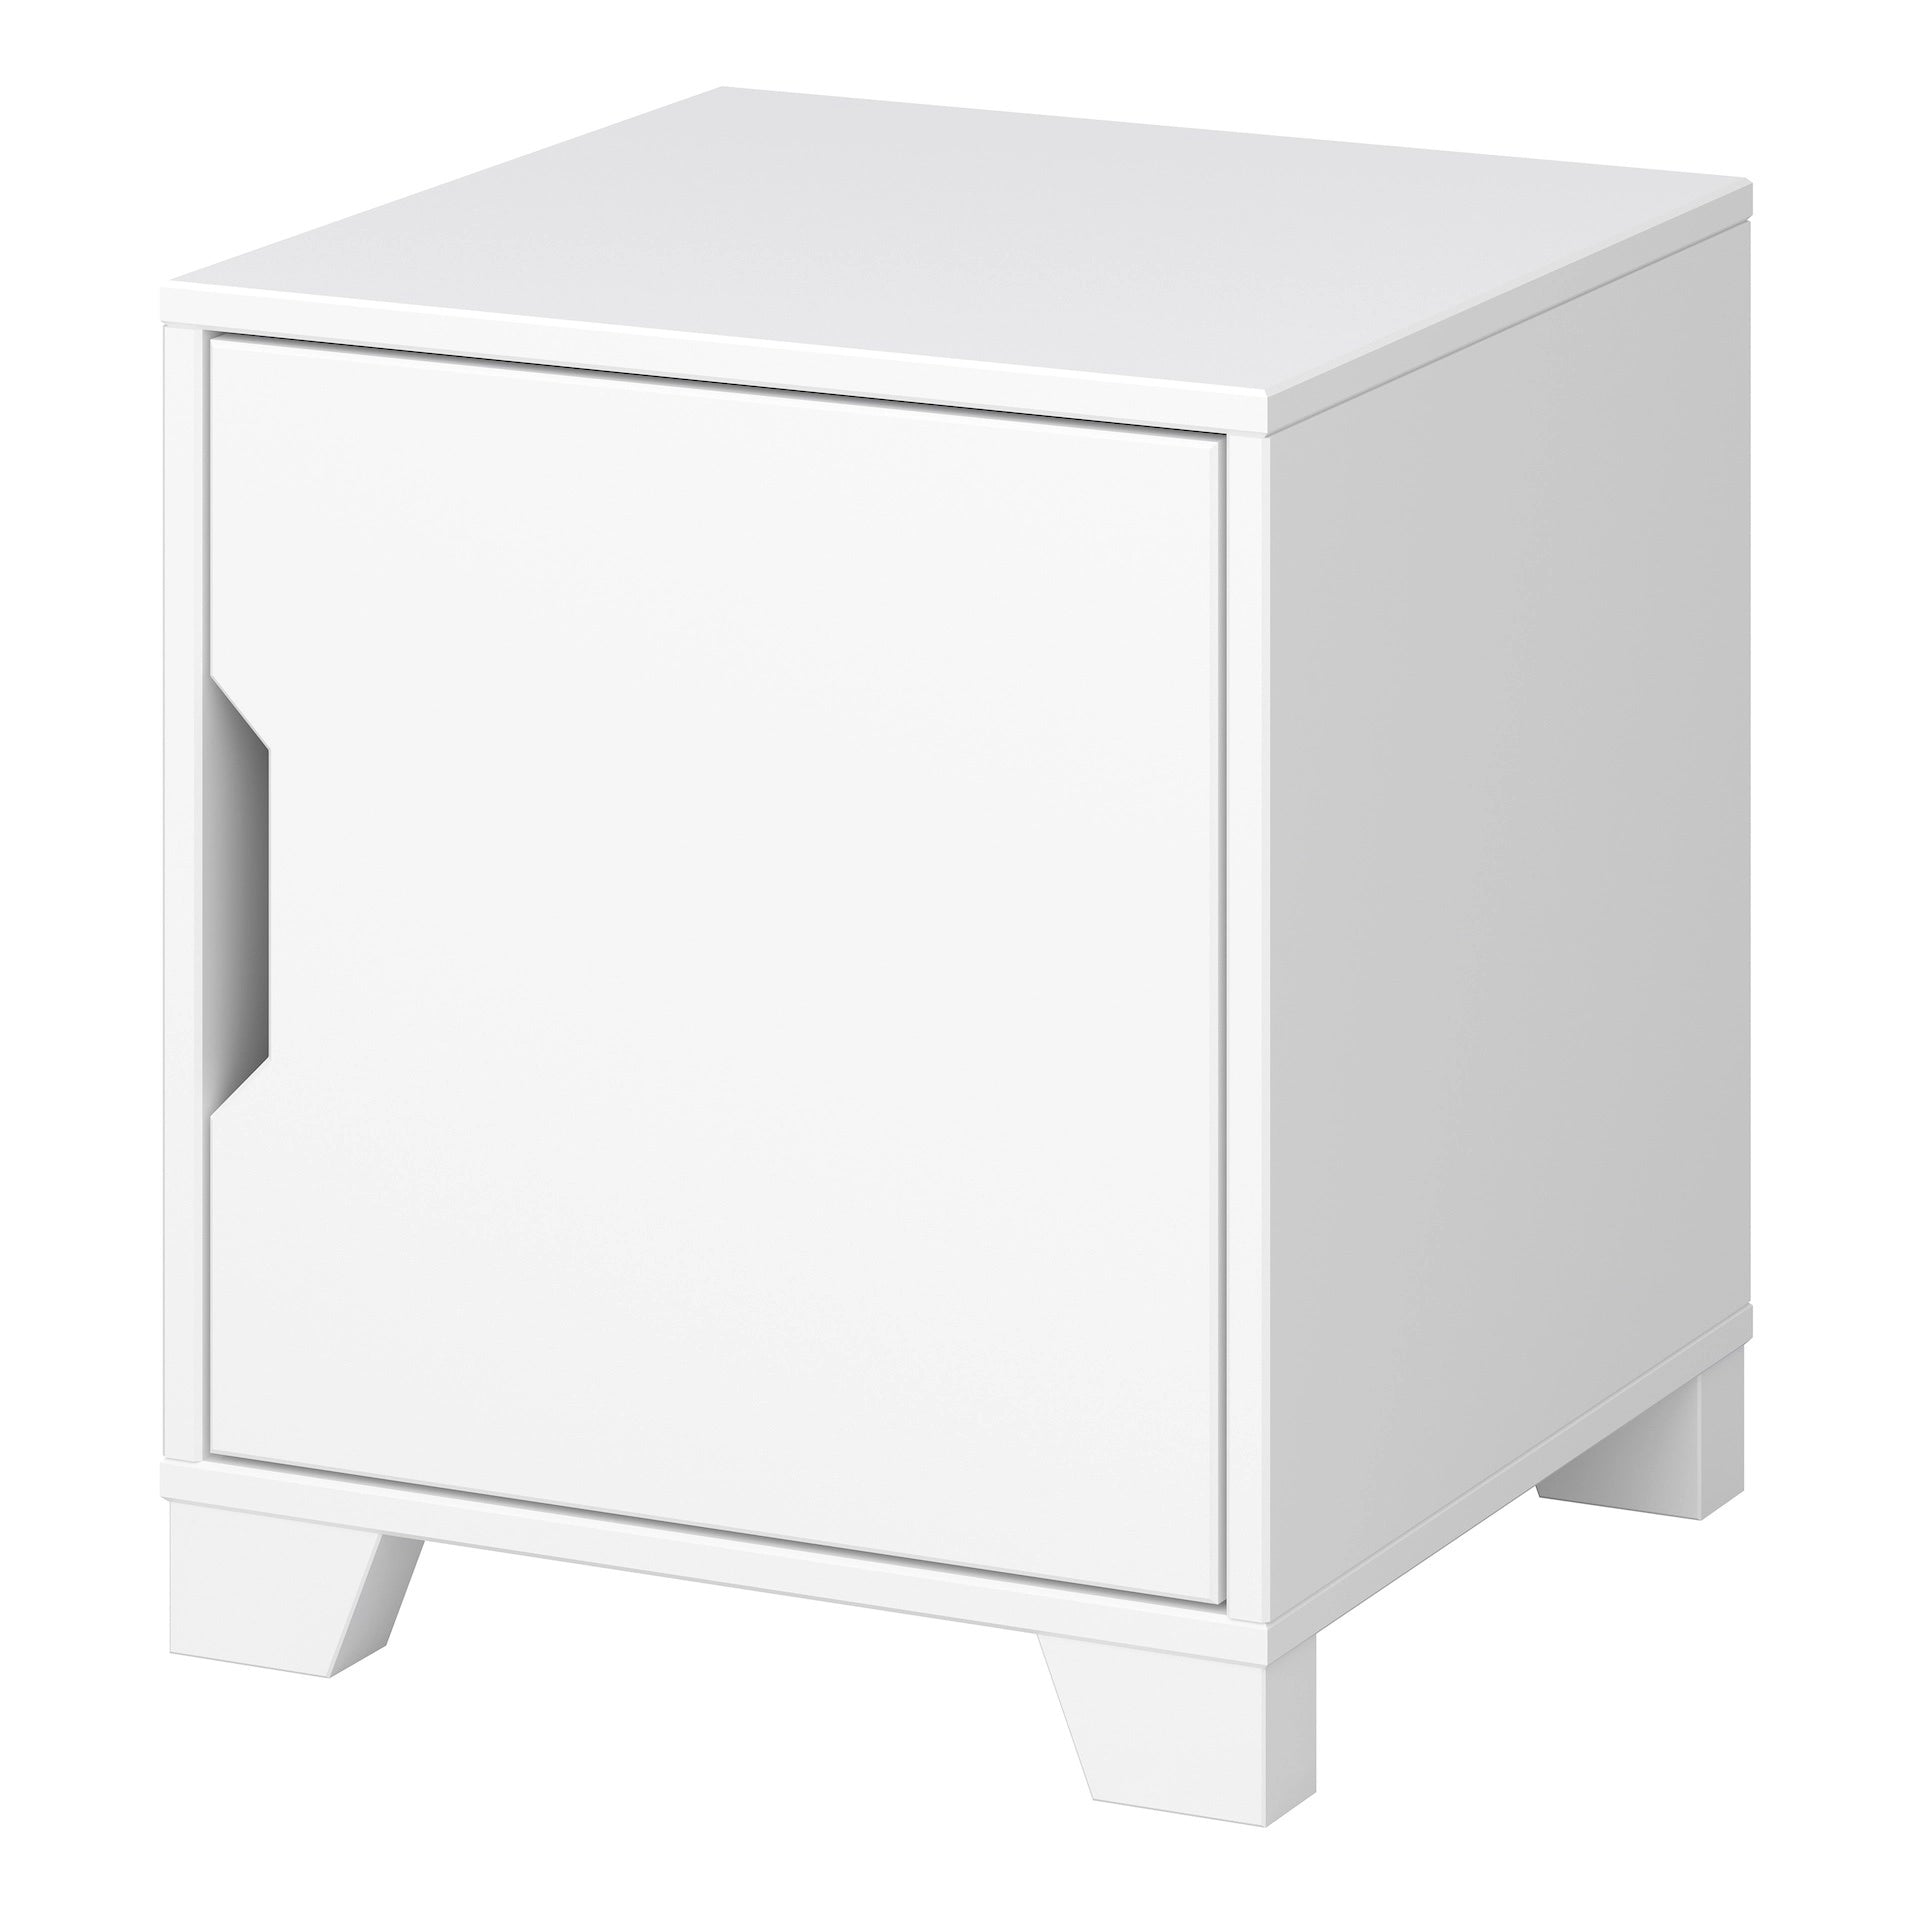 Furniture To Go Loke Bedside Table 1 Door in Pure White